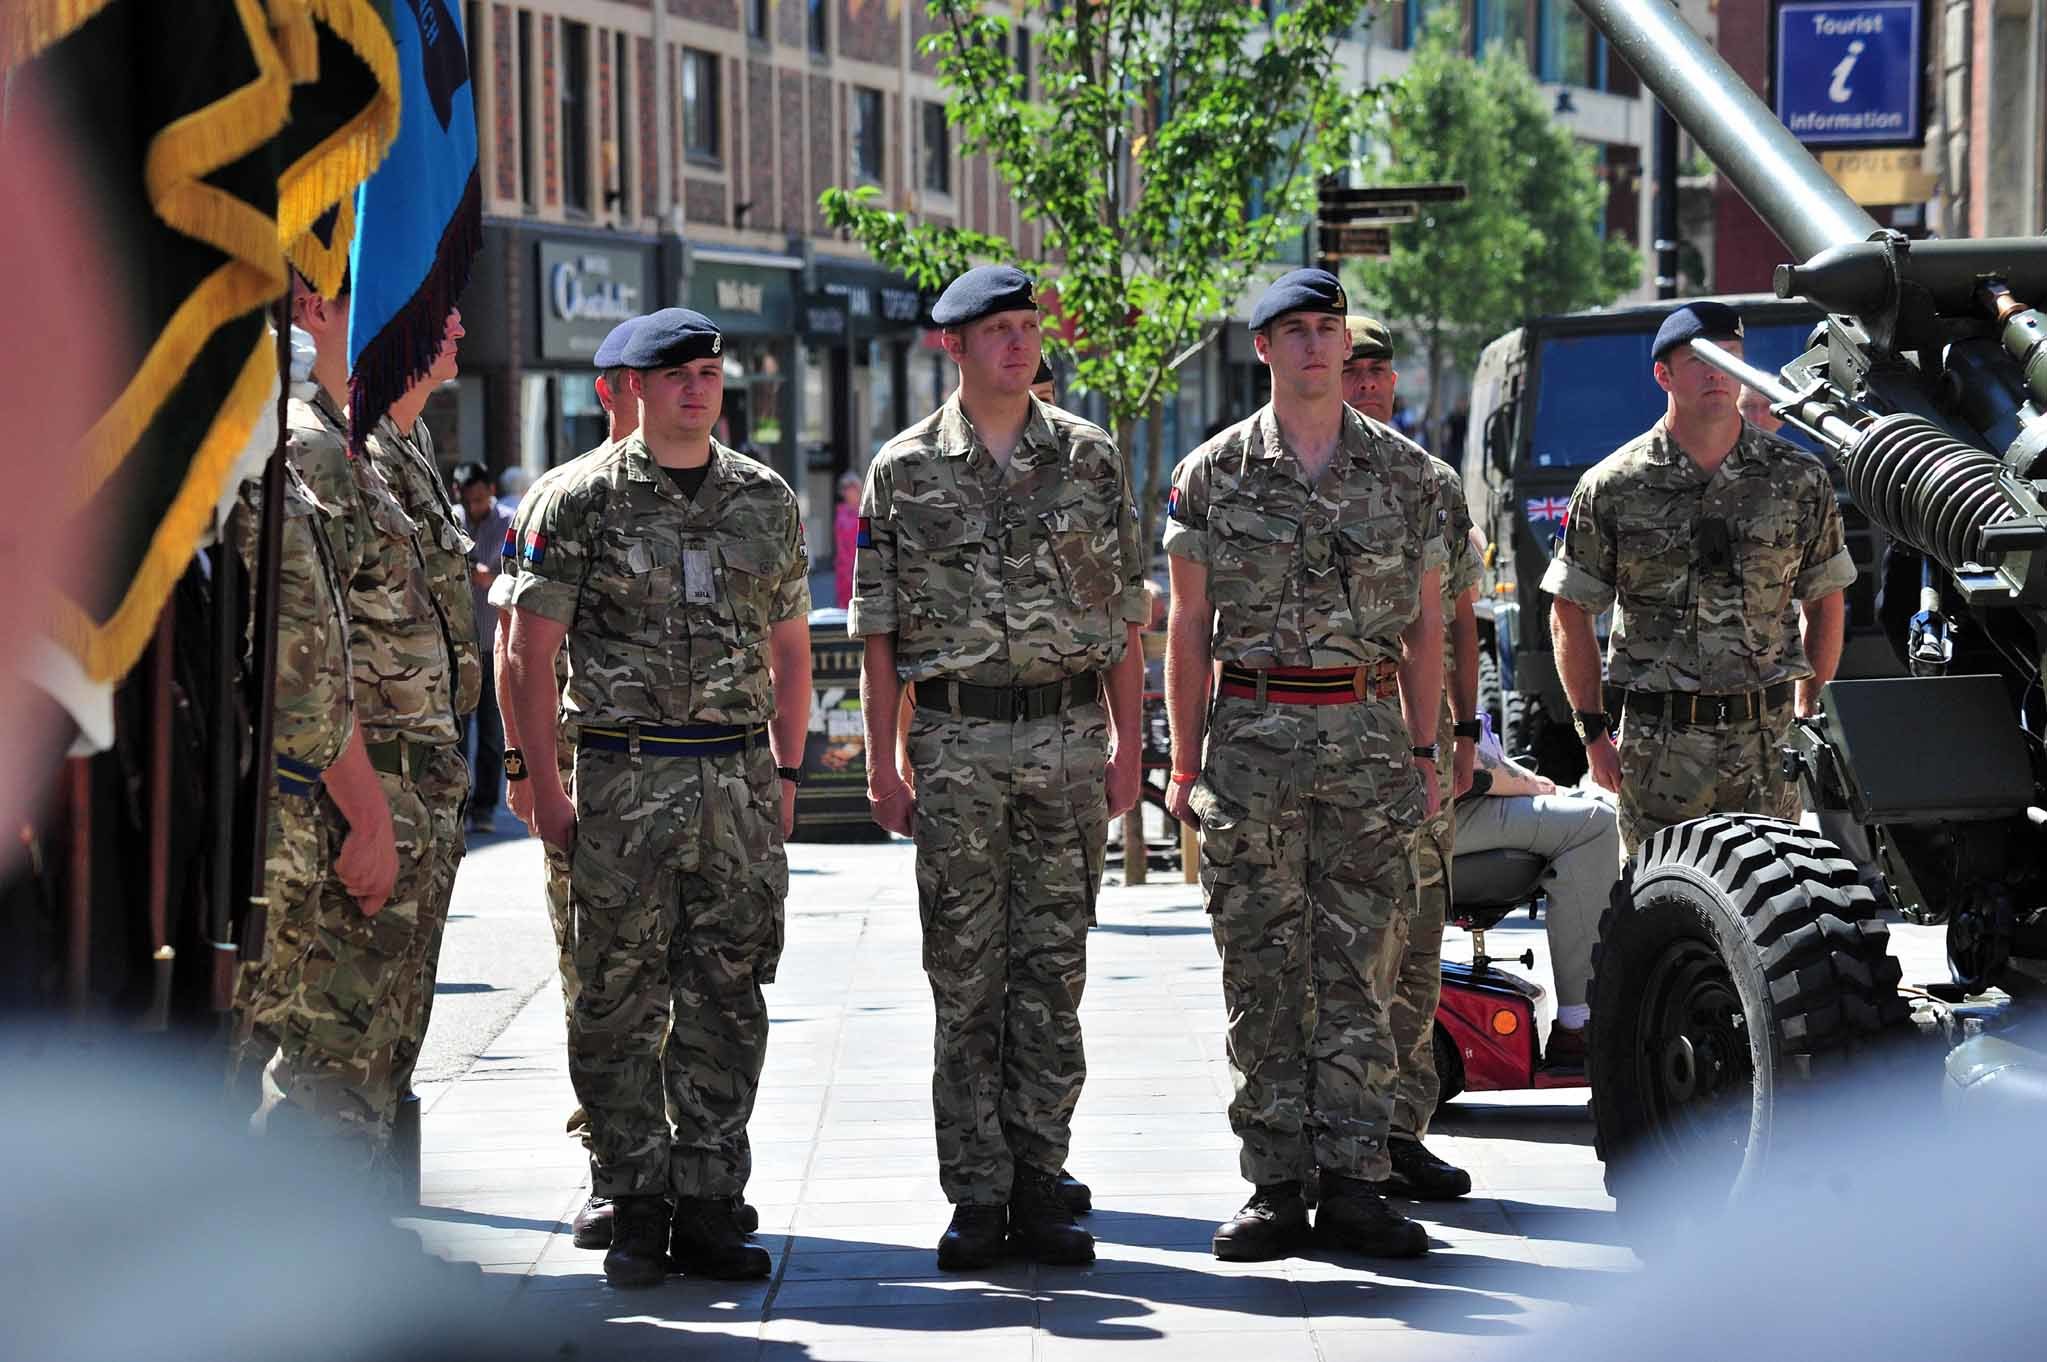 Members of the 214 (Worcestershire Battery) Royal Artillery taking part in the service during the raising of the Armed Forces Day Flag above the Guildhall, High Street, Worcester in 2018